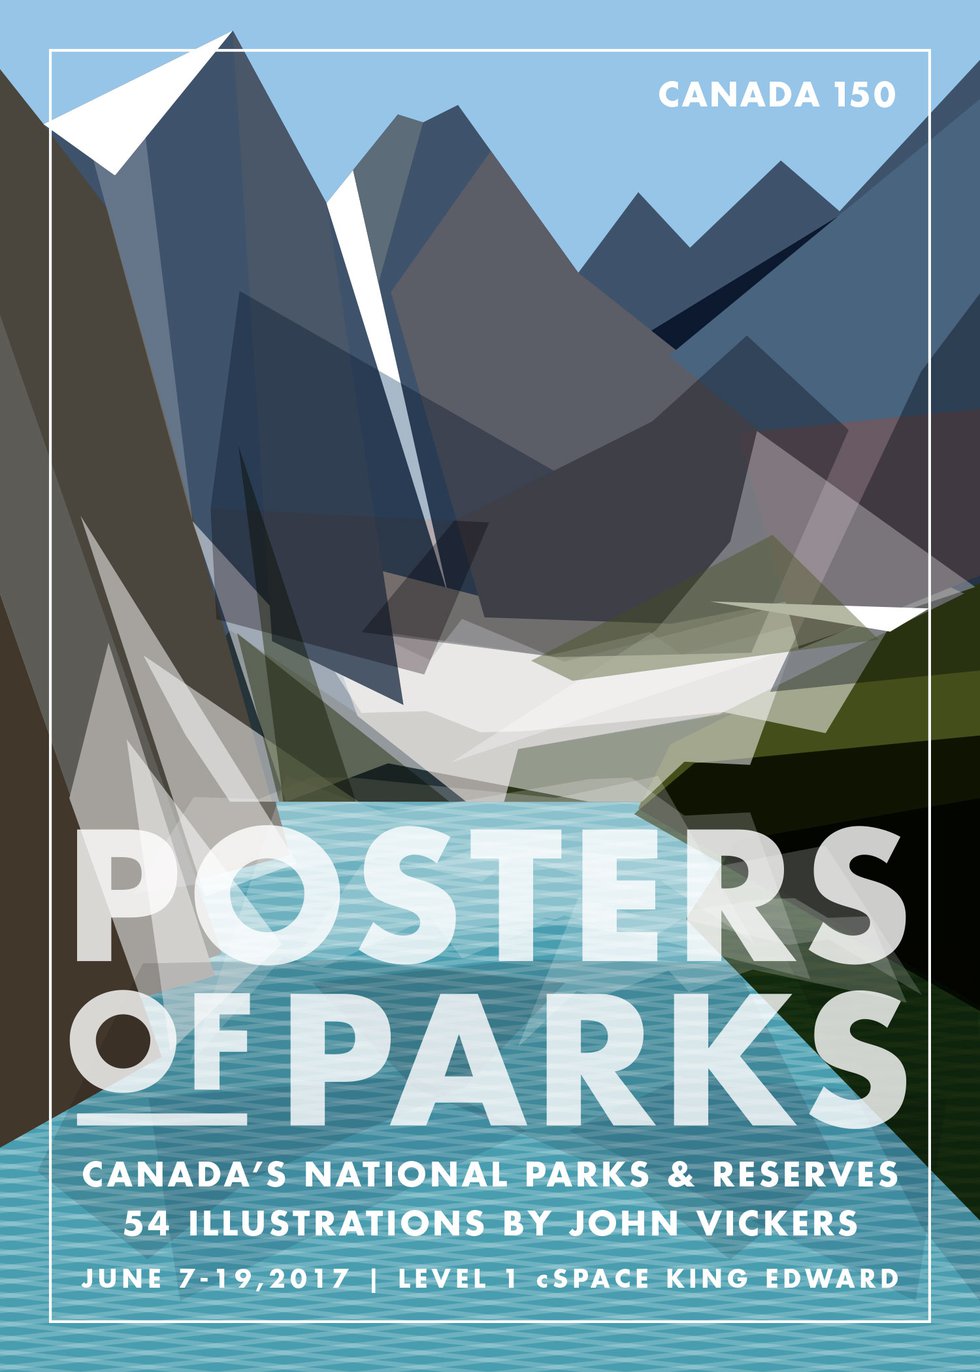 John Vickers, "Posters of Parks," invitation